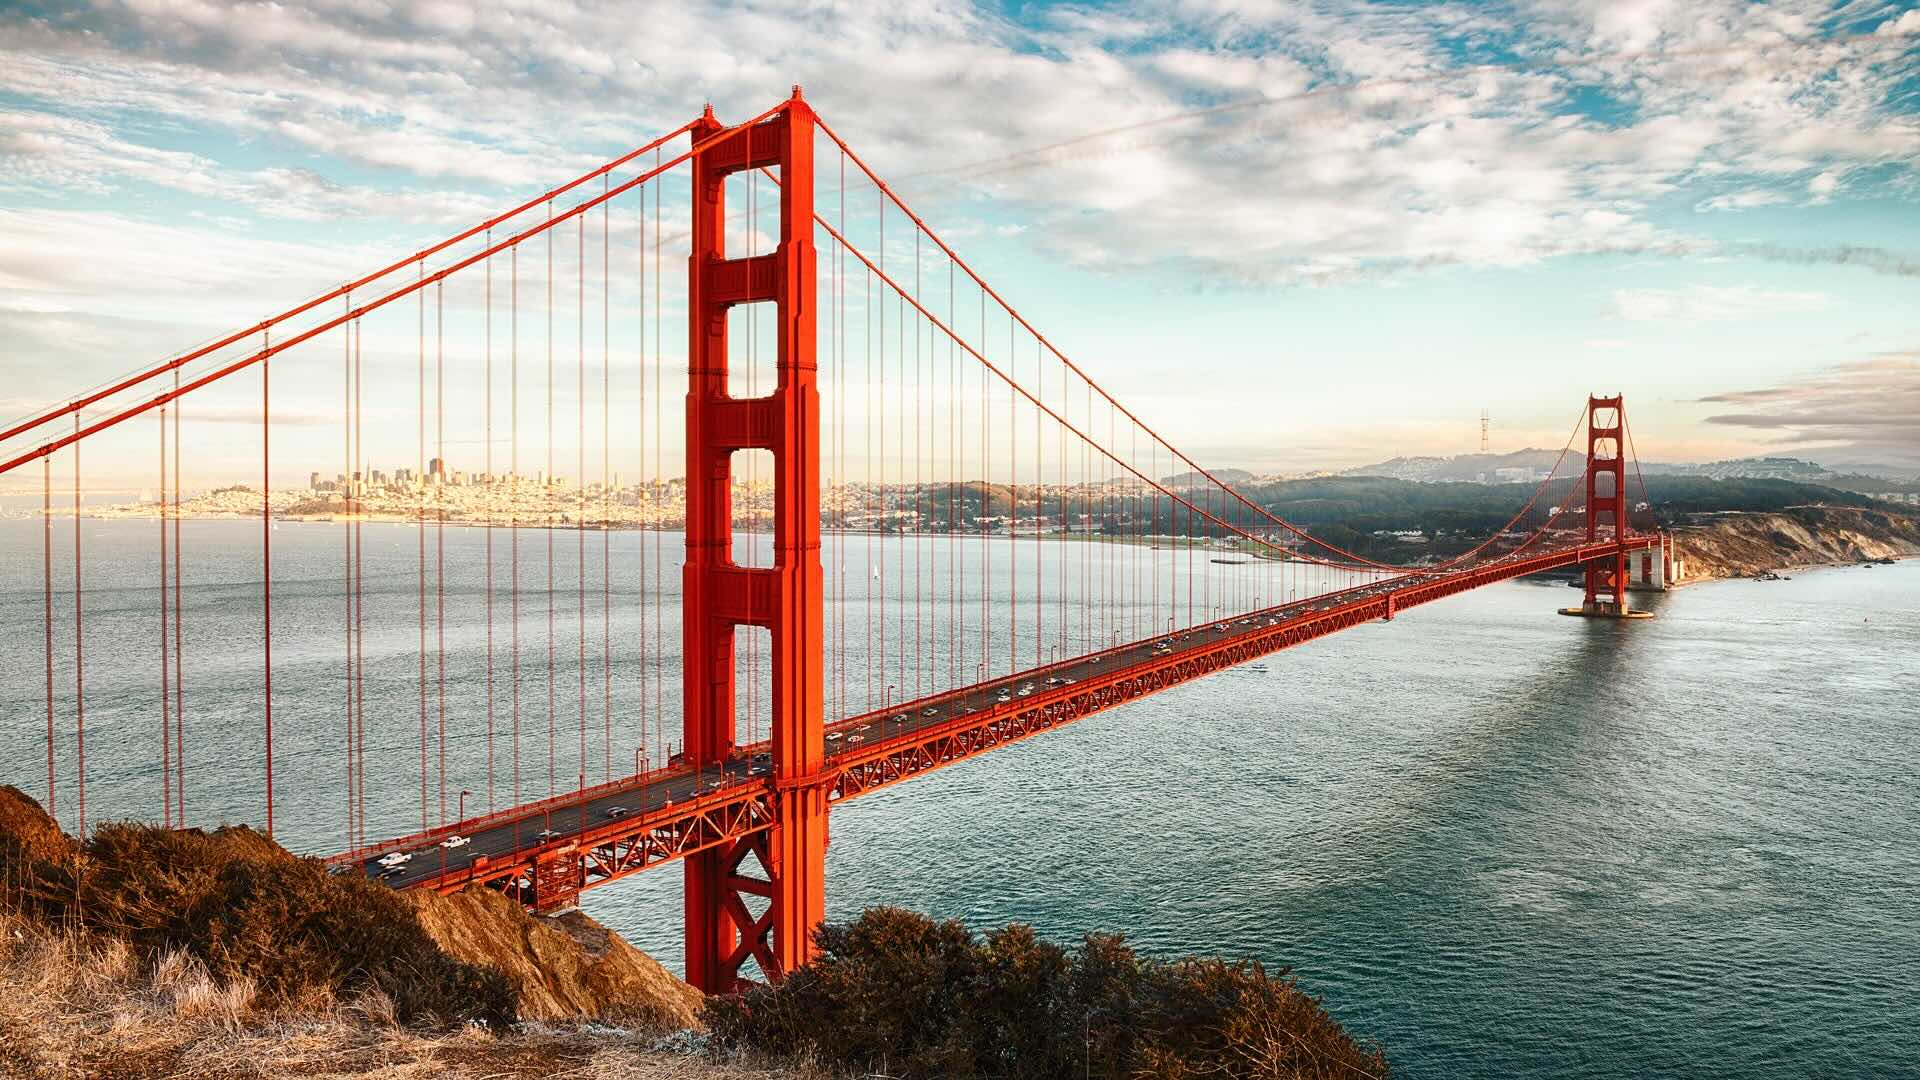 What Style Of Construction Was Used To Make The Golden Gate Bridge?